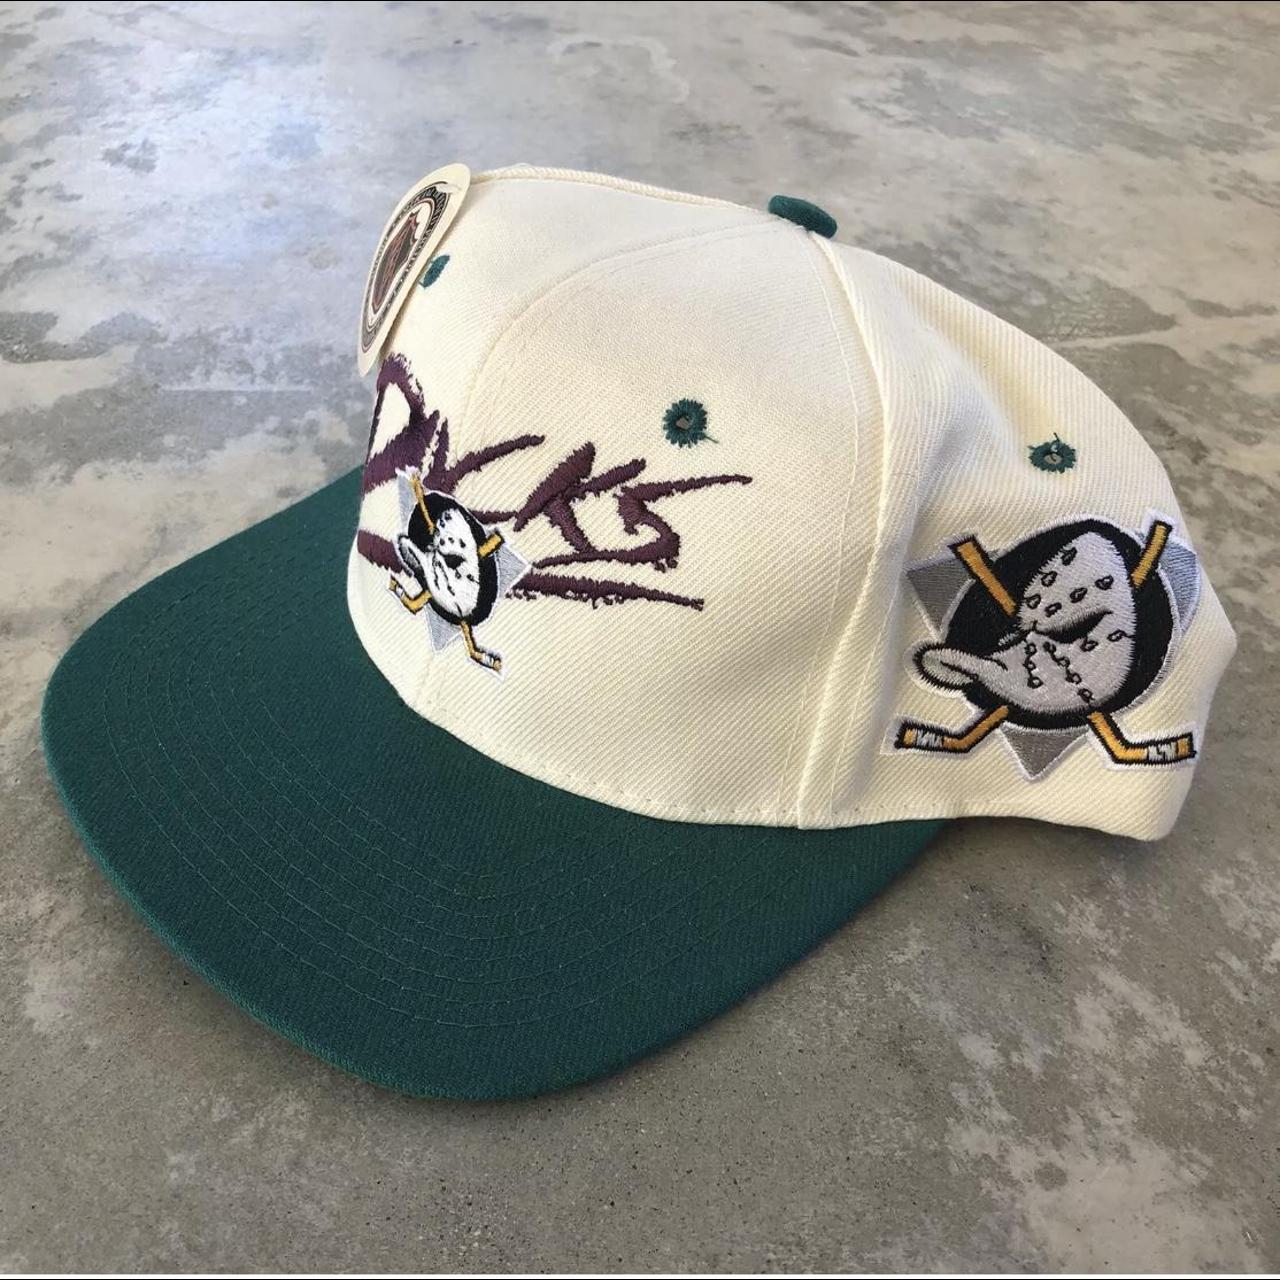 Vintage 90's Mighty Ducks Snapback $25 DM if interested or